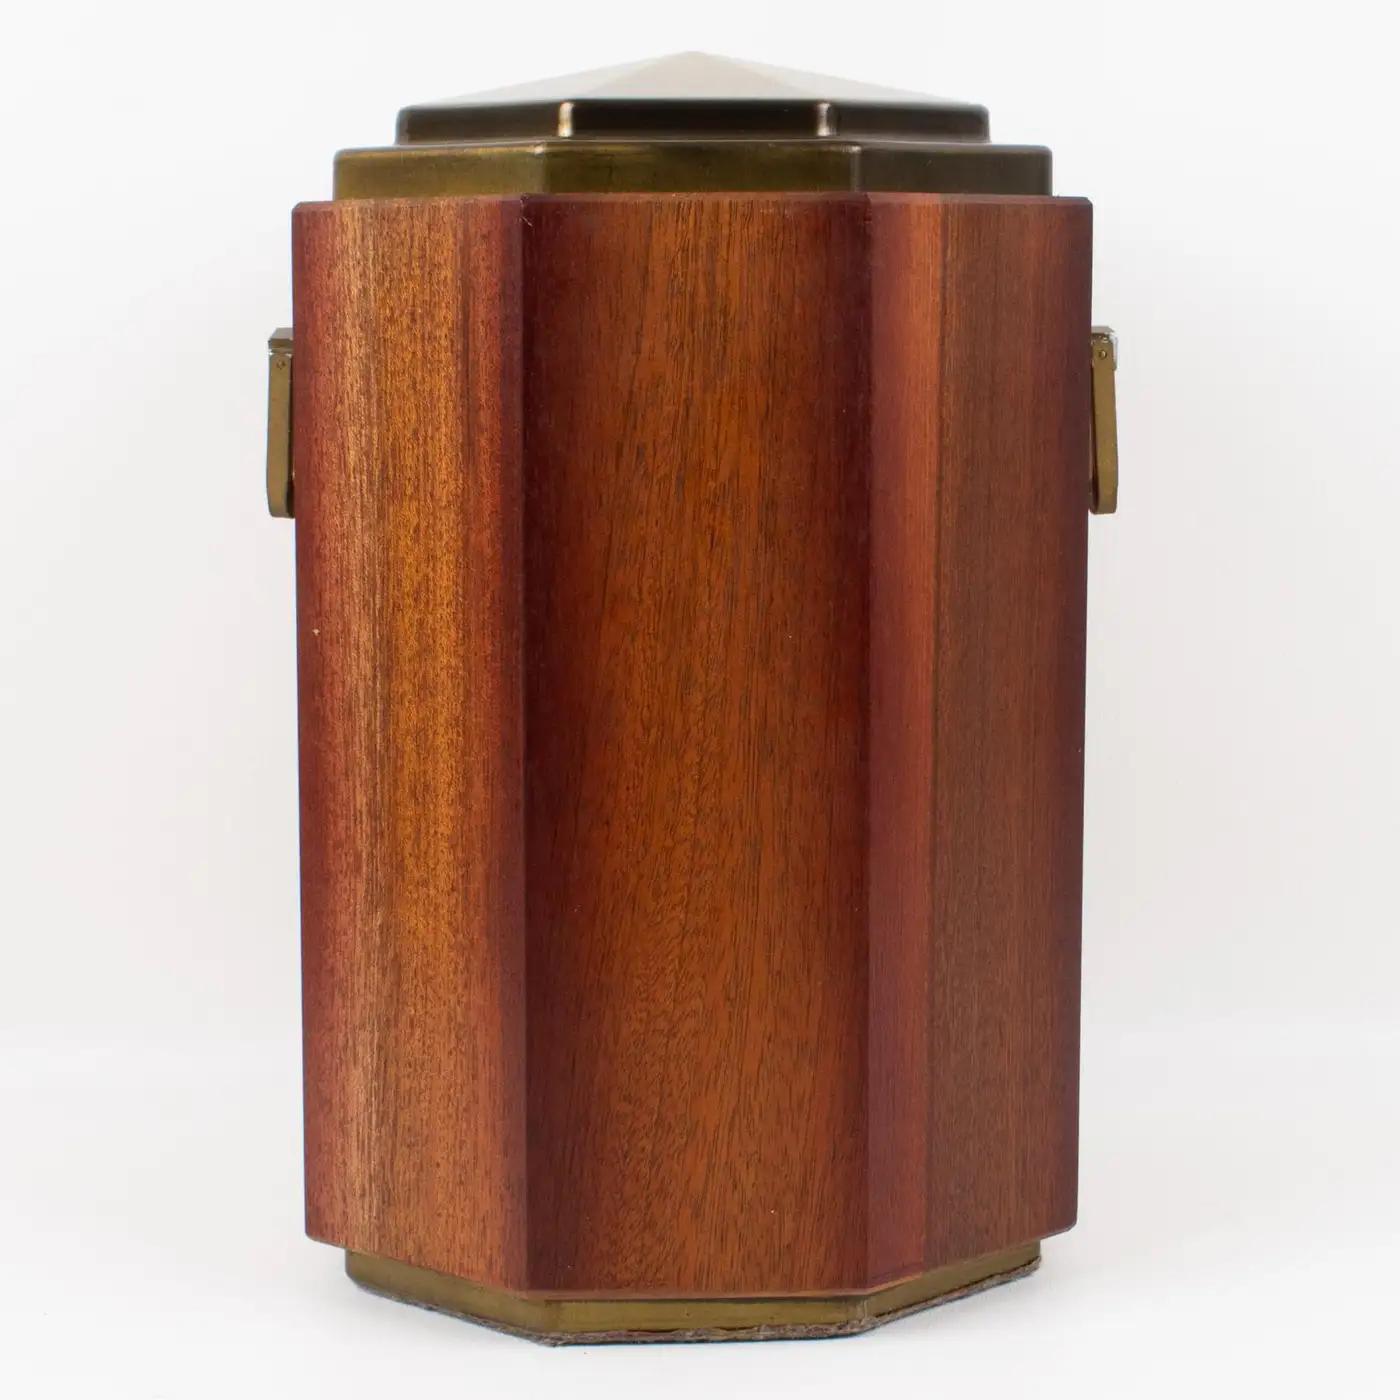 Valenti, Spain, designed this lovely high-end quality modernist decorative lidded box in the 1980s. The yachting style has a tropical wood faceted body with a brass lid and handles. The inside of the box is lined with cobalt blue velvet. There is no